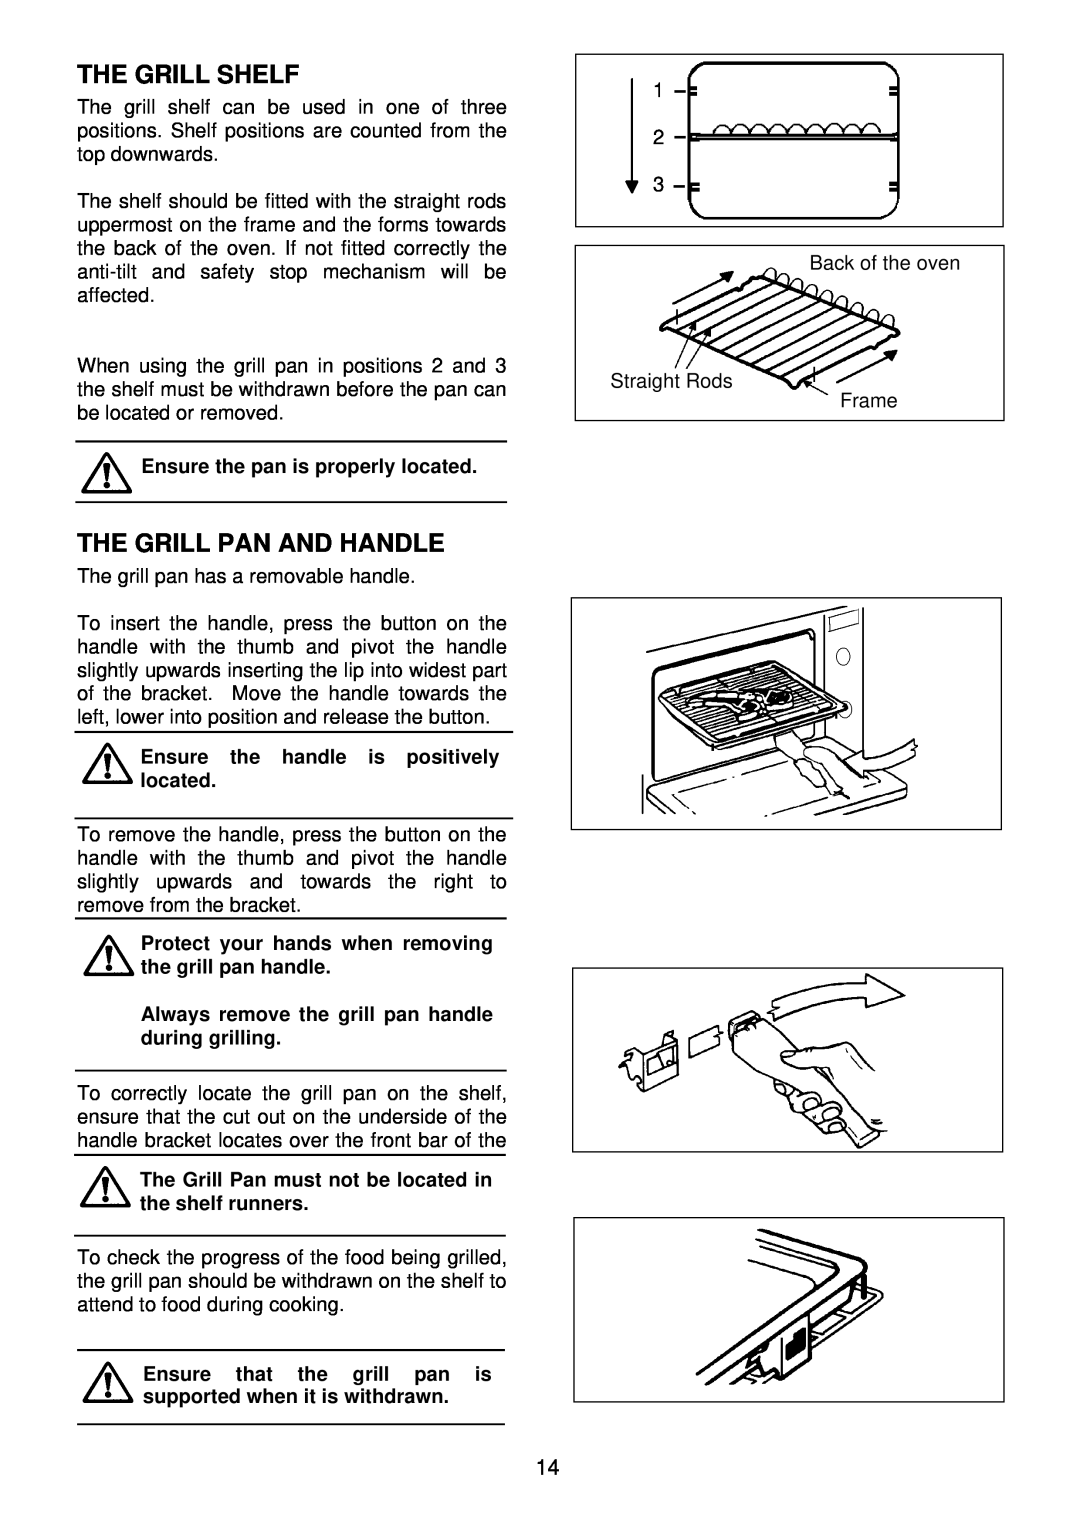 Electrolux EDB 876 manual The Grill Shelf, The Grill Pan And Handle, Ensure the pan is properly located 